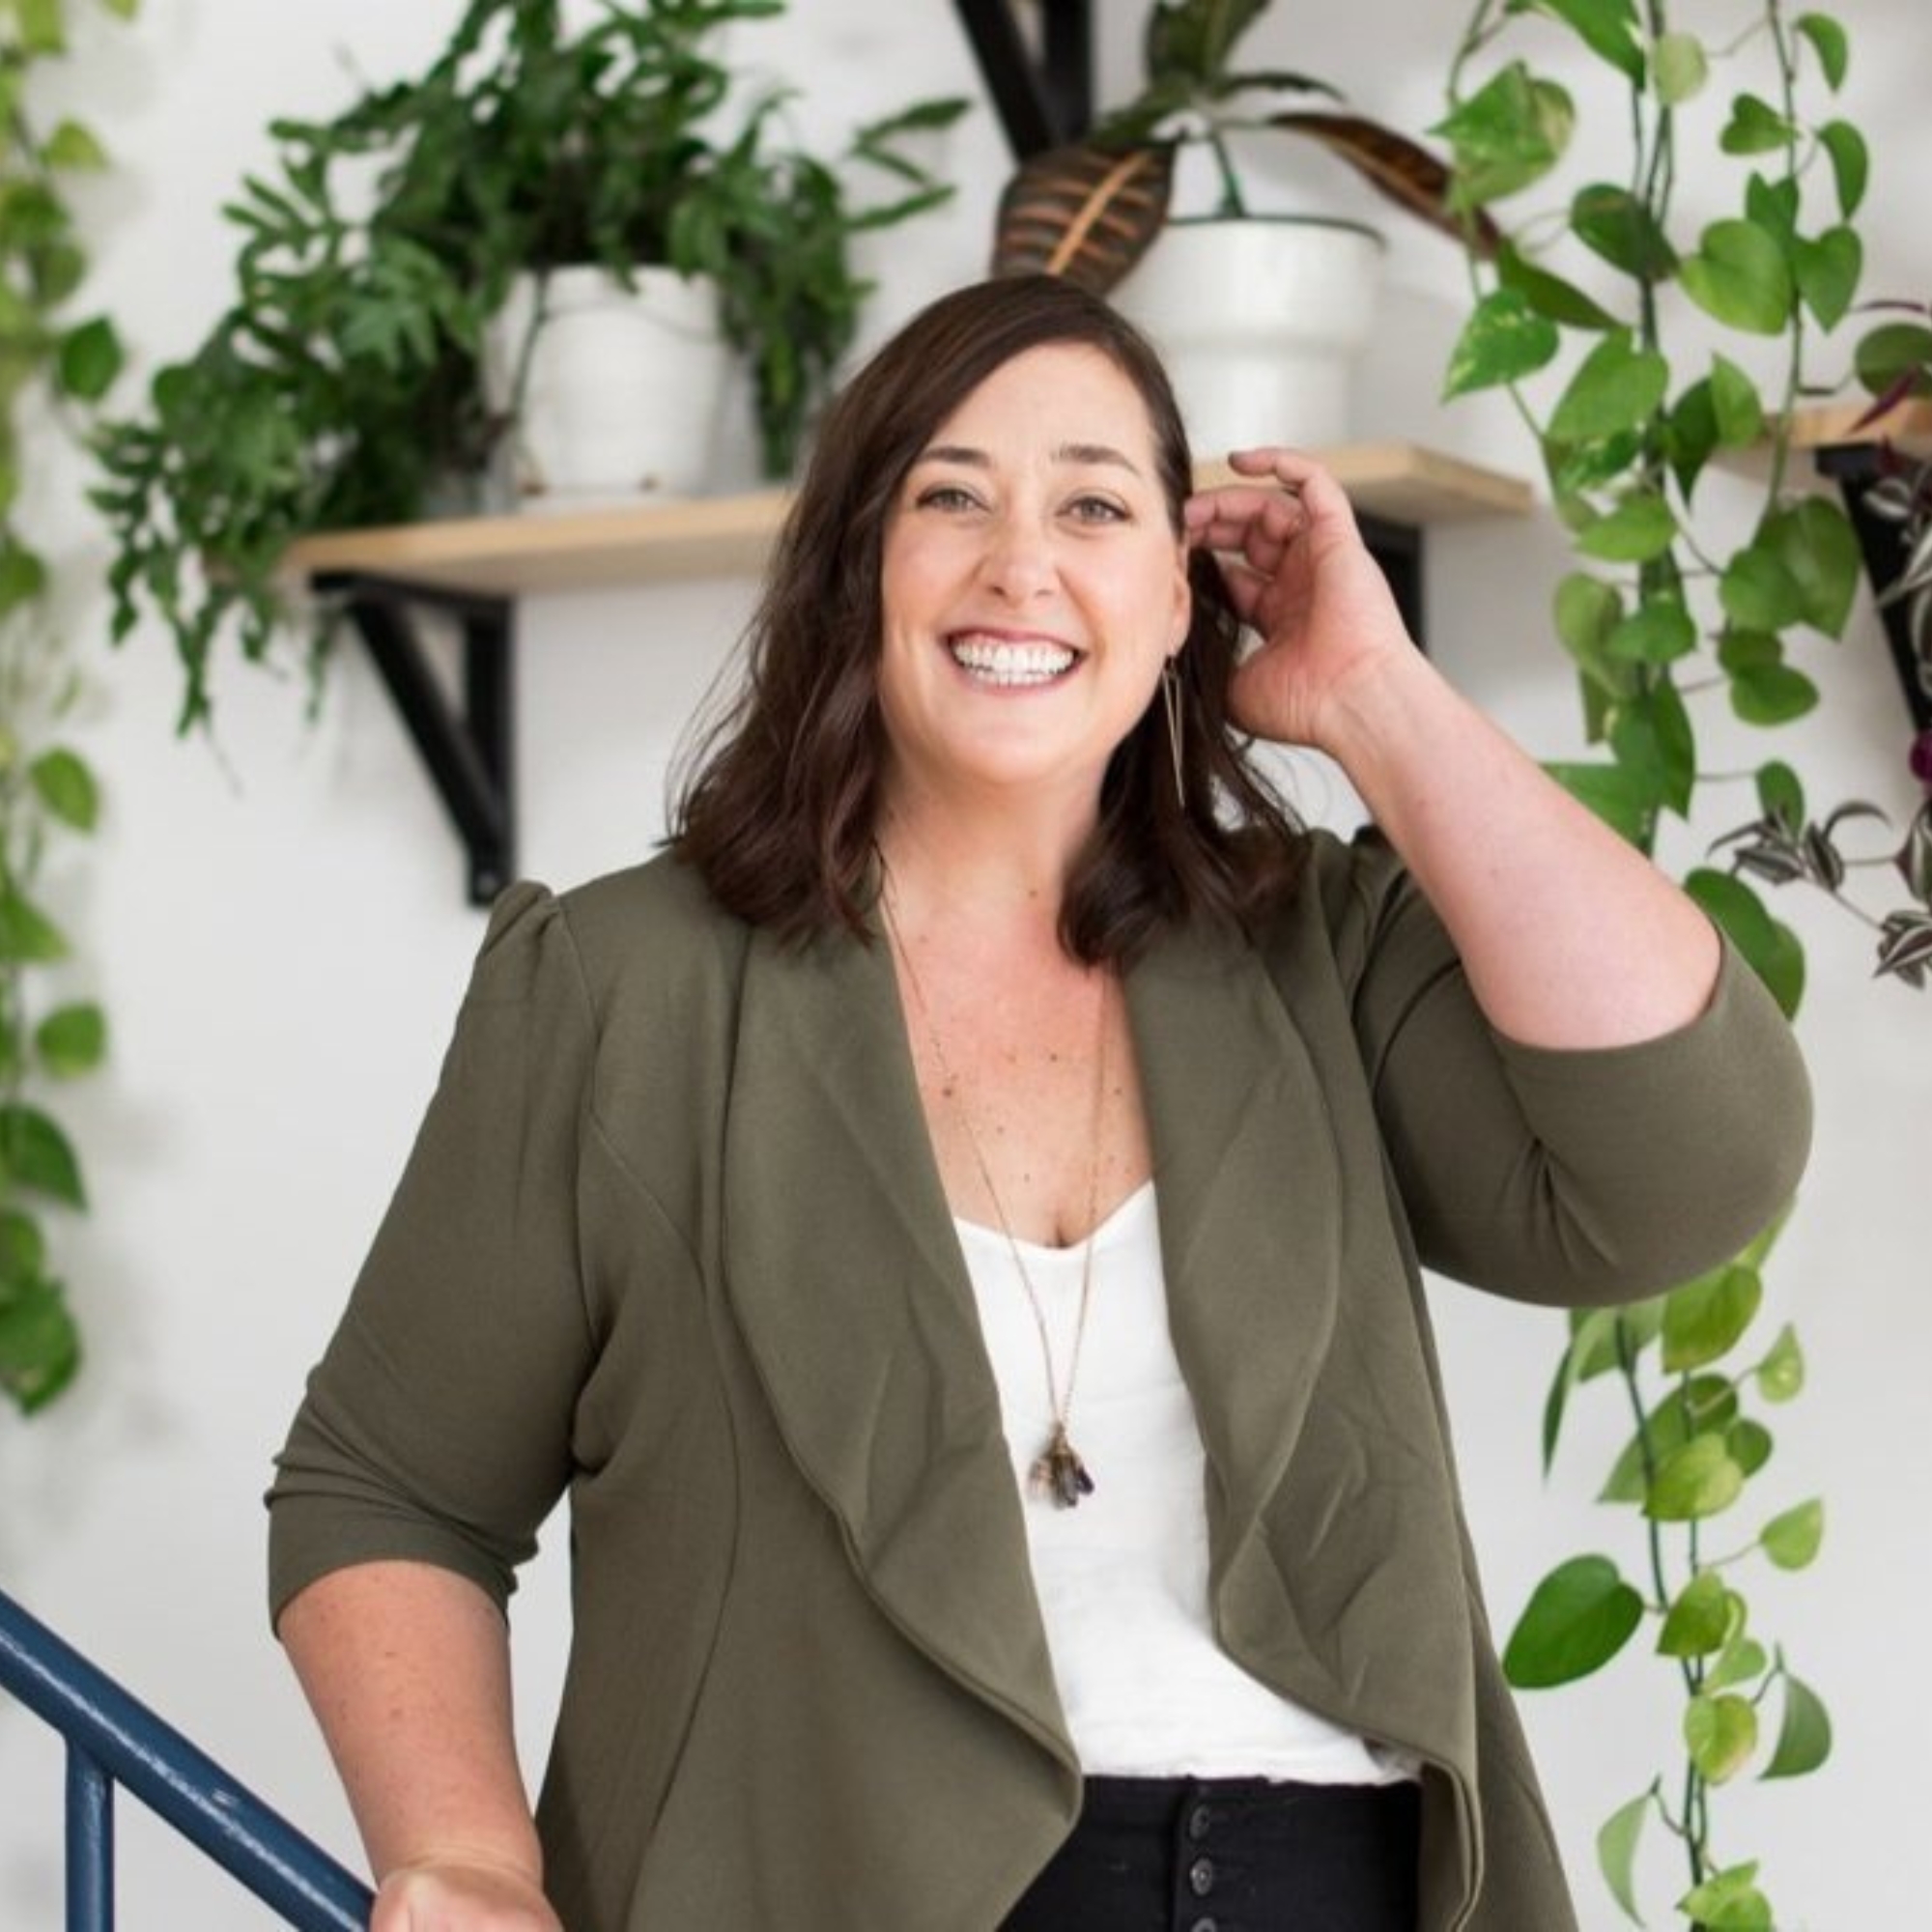 Jennifer Verruto, Founder and CEO of Blythe Interiors